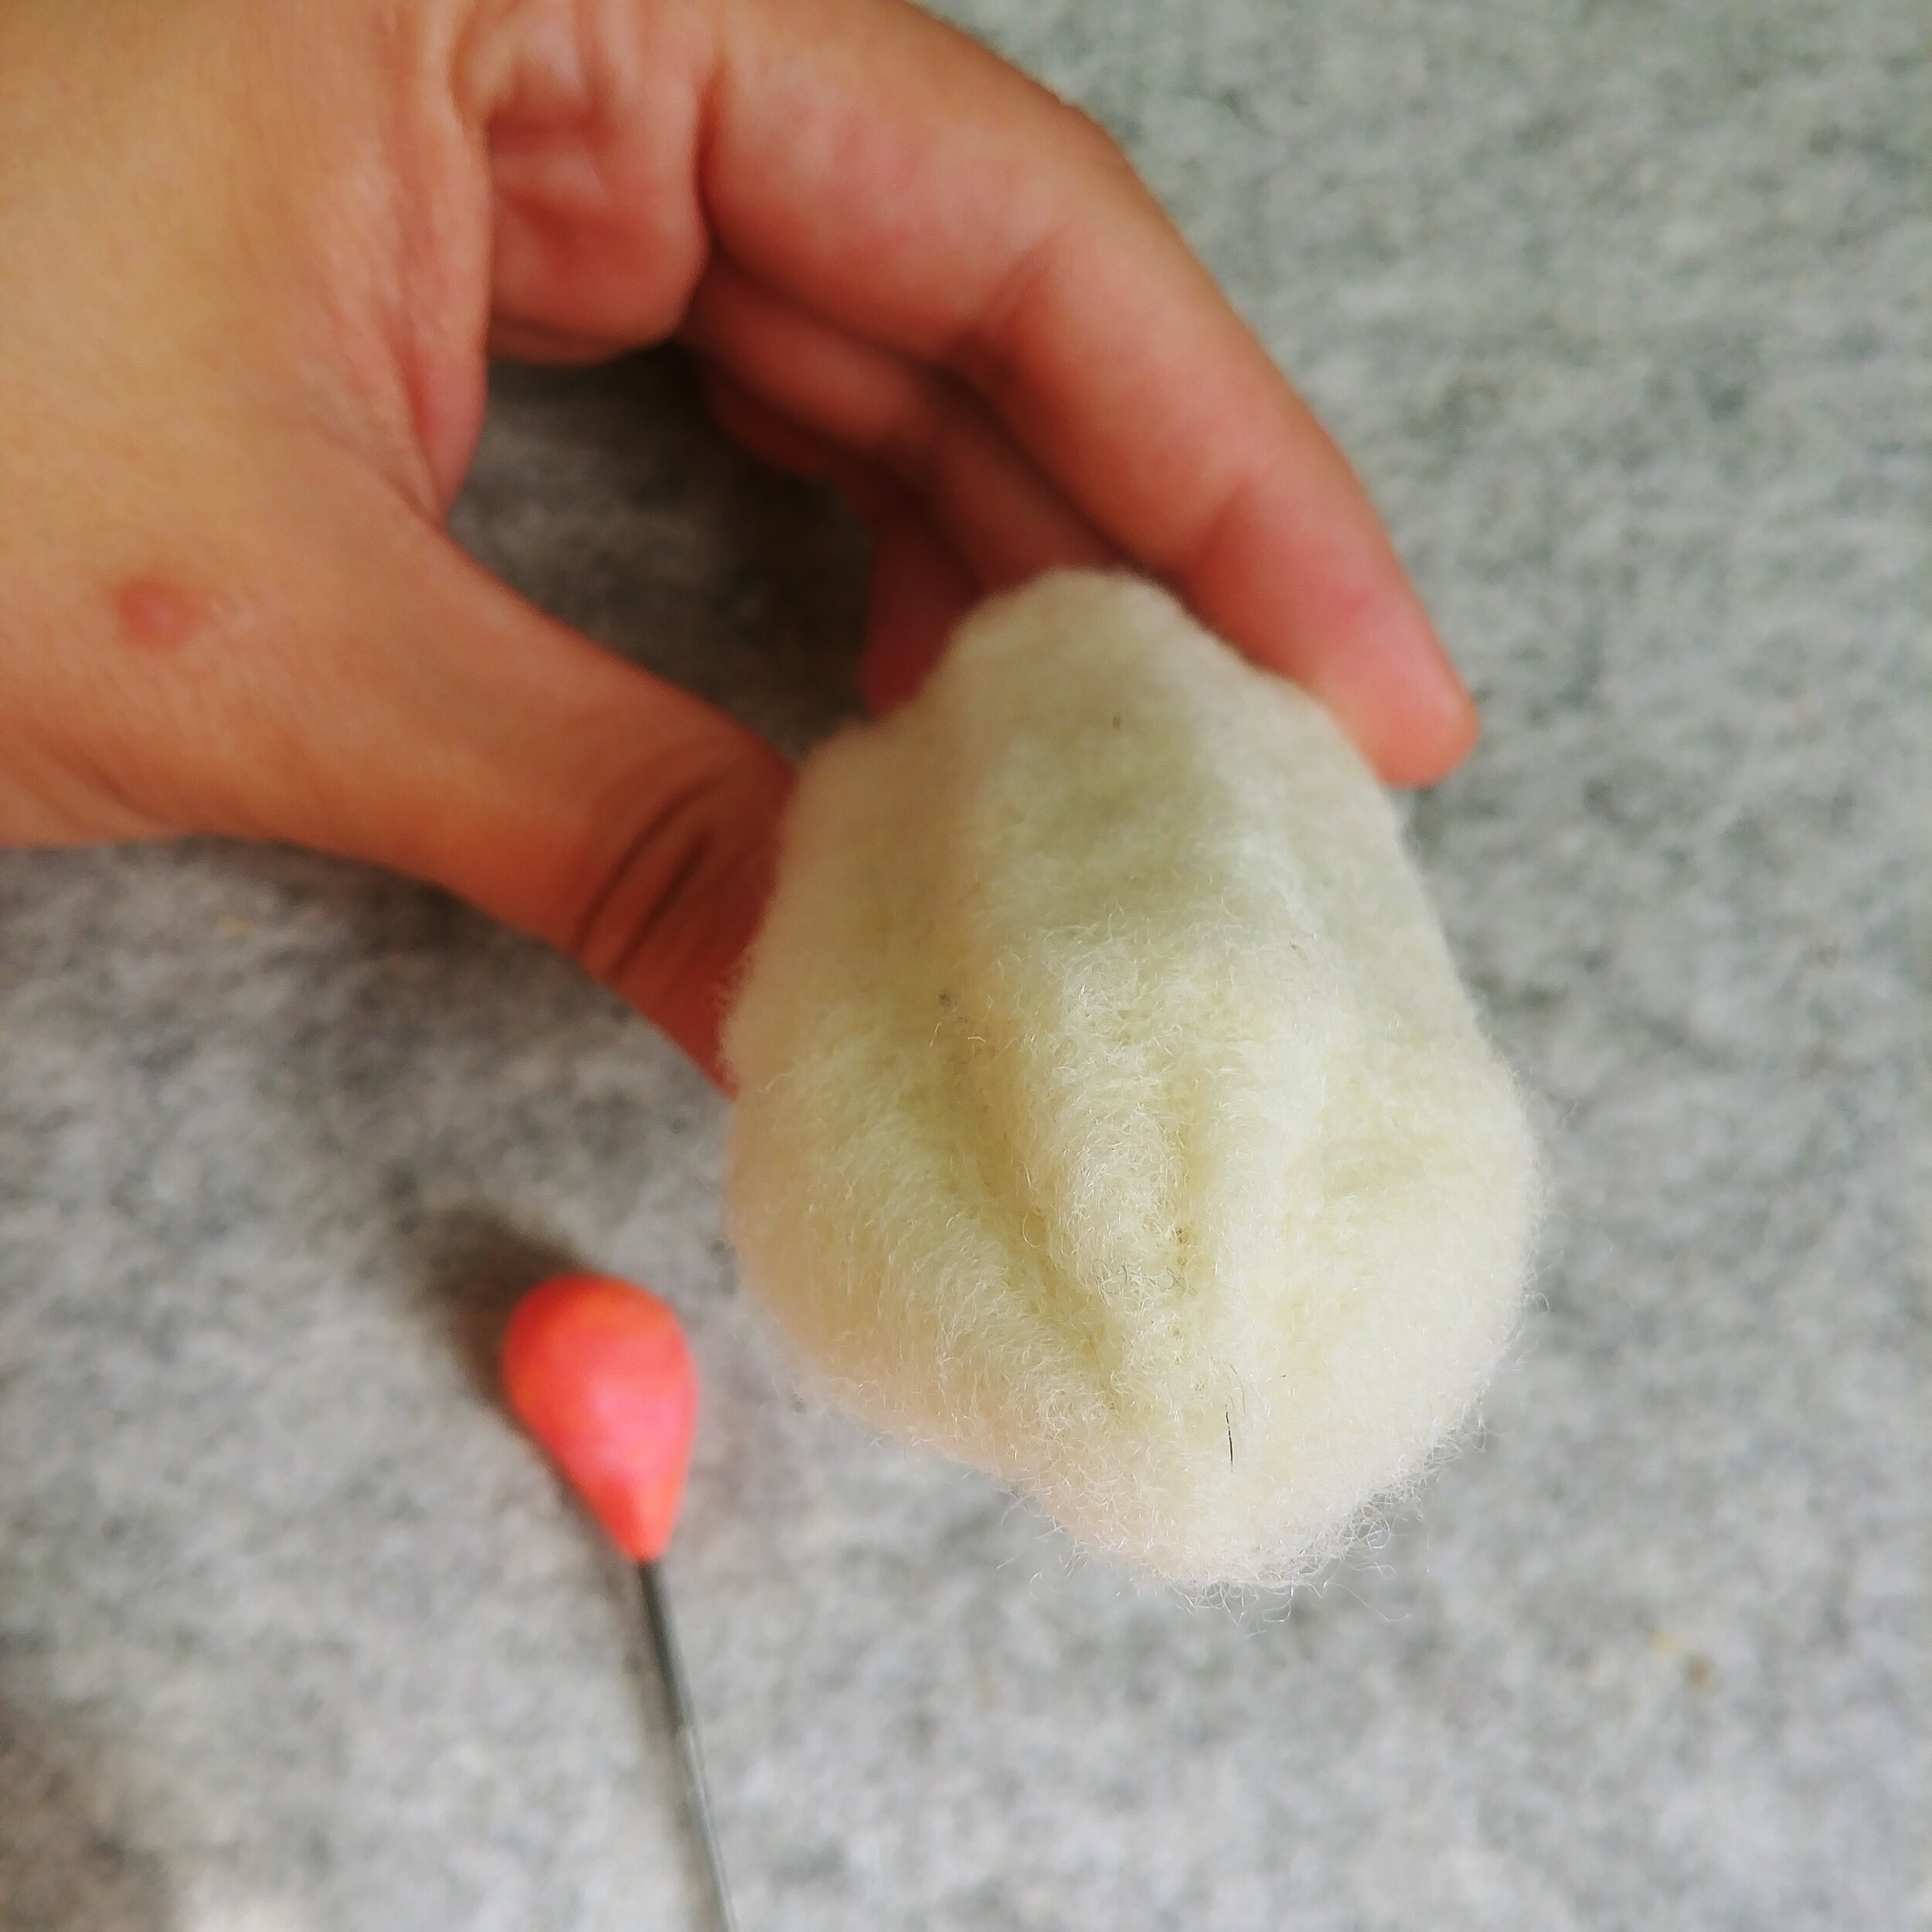 Wool Glossary for Needle Felters — Star Magnolias